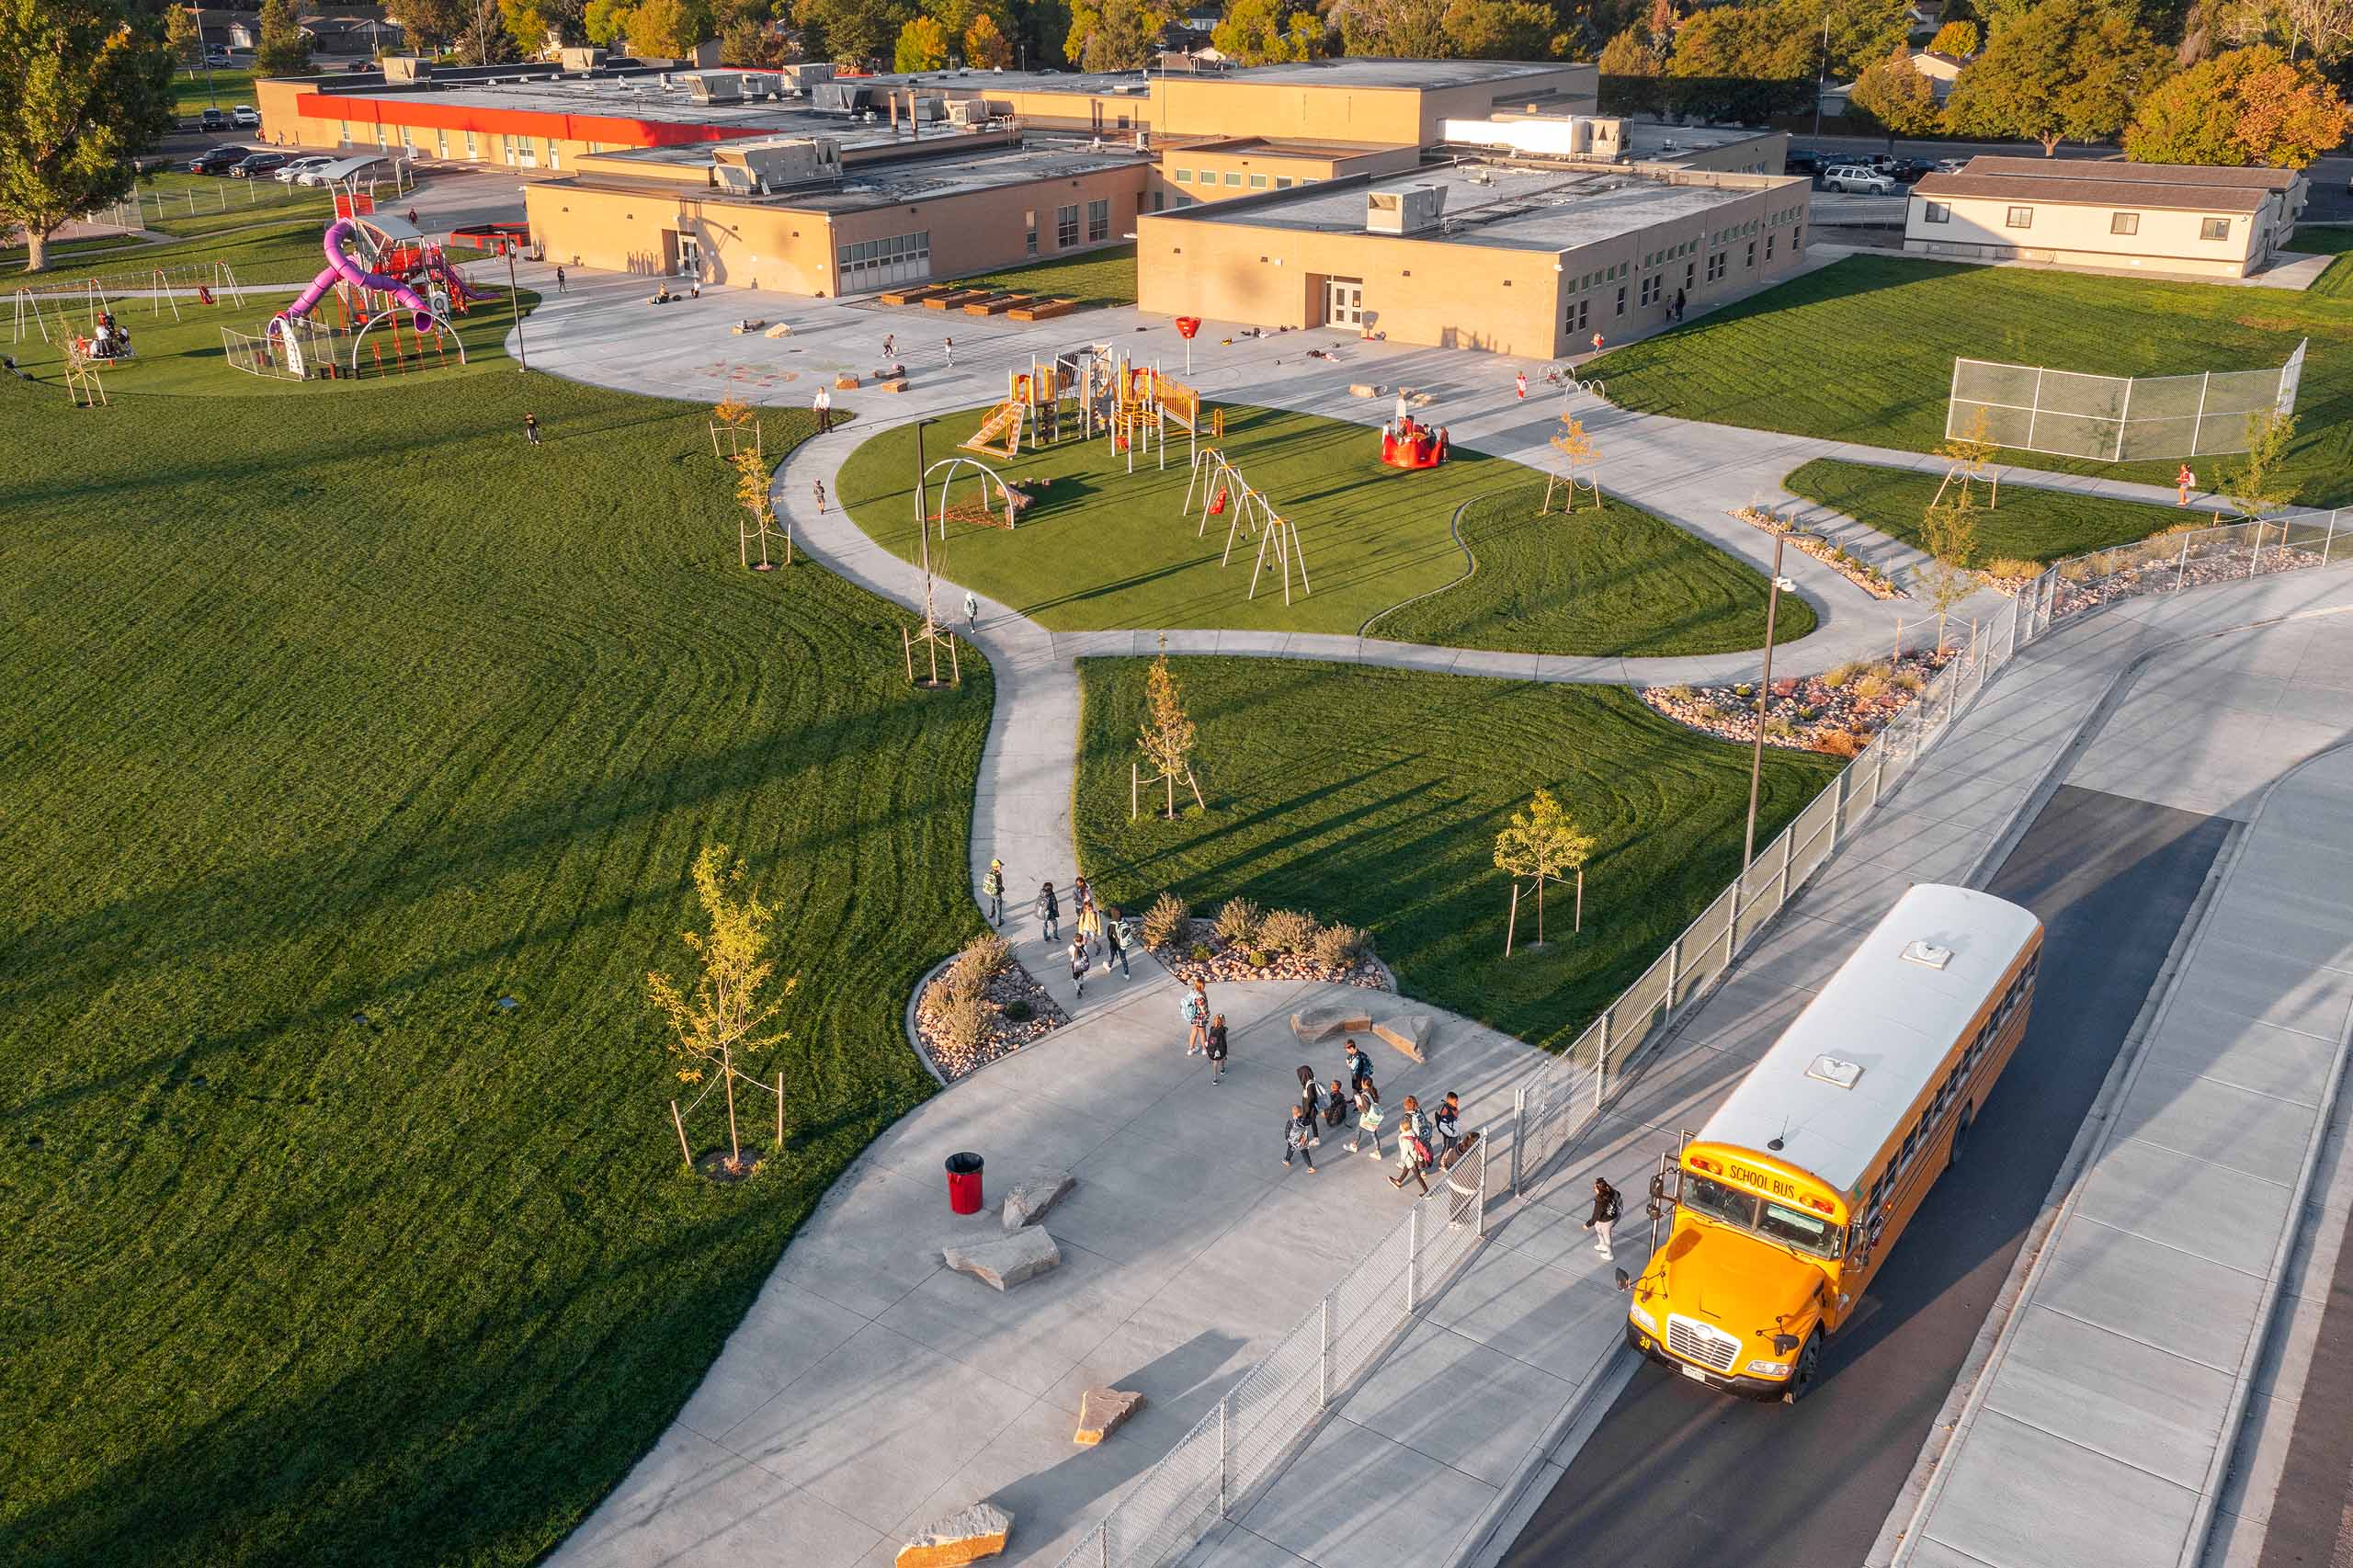 Aerial drone photography. New drop off and pick up bus lane at Eaton Elementary school. K-12 remodel project by RB+B Architects and FCI Constructors.